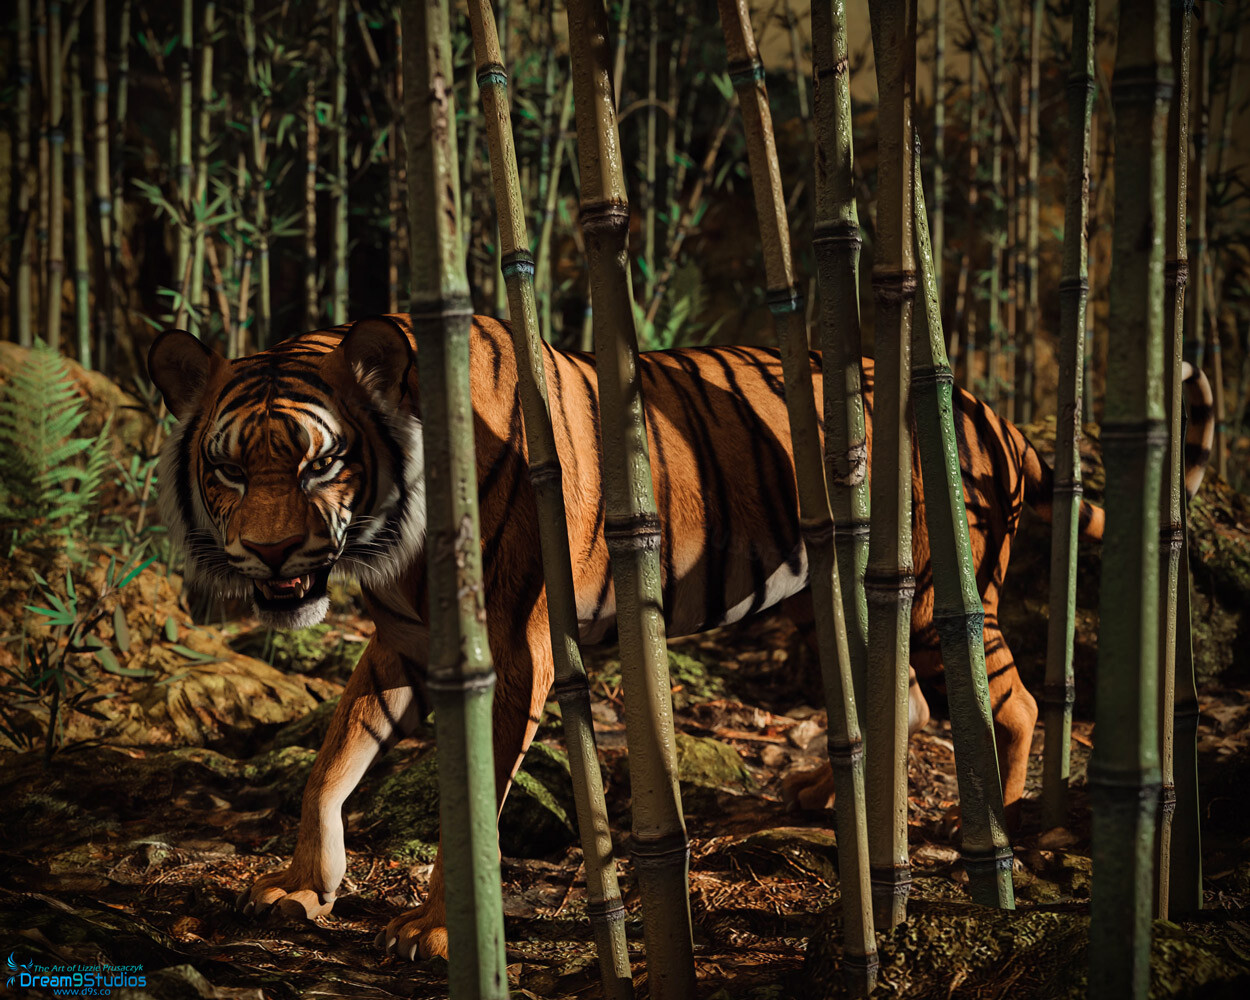 The majestic tiger is on the prowl through the mossy bamboo forest and it looks like he has caught sight of his photographer.